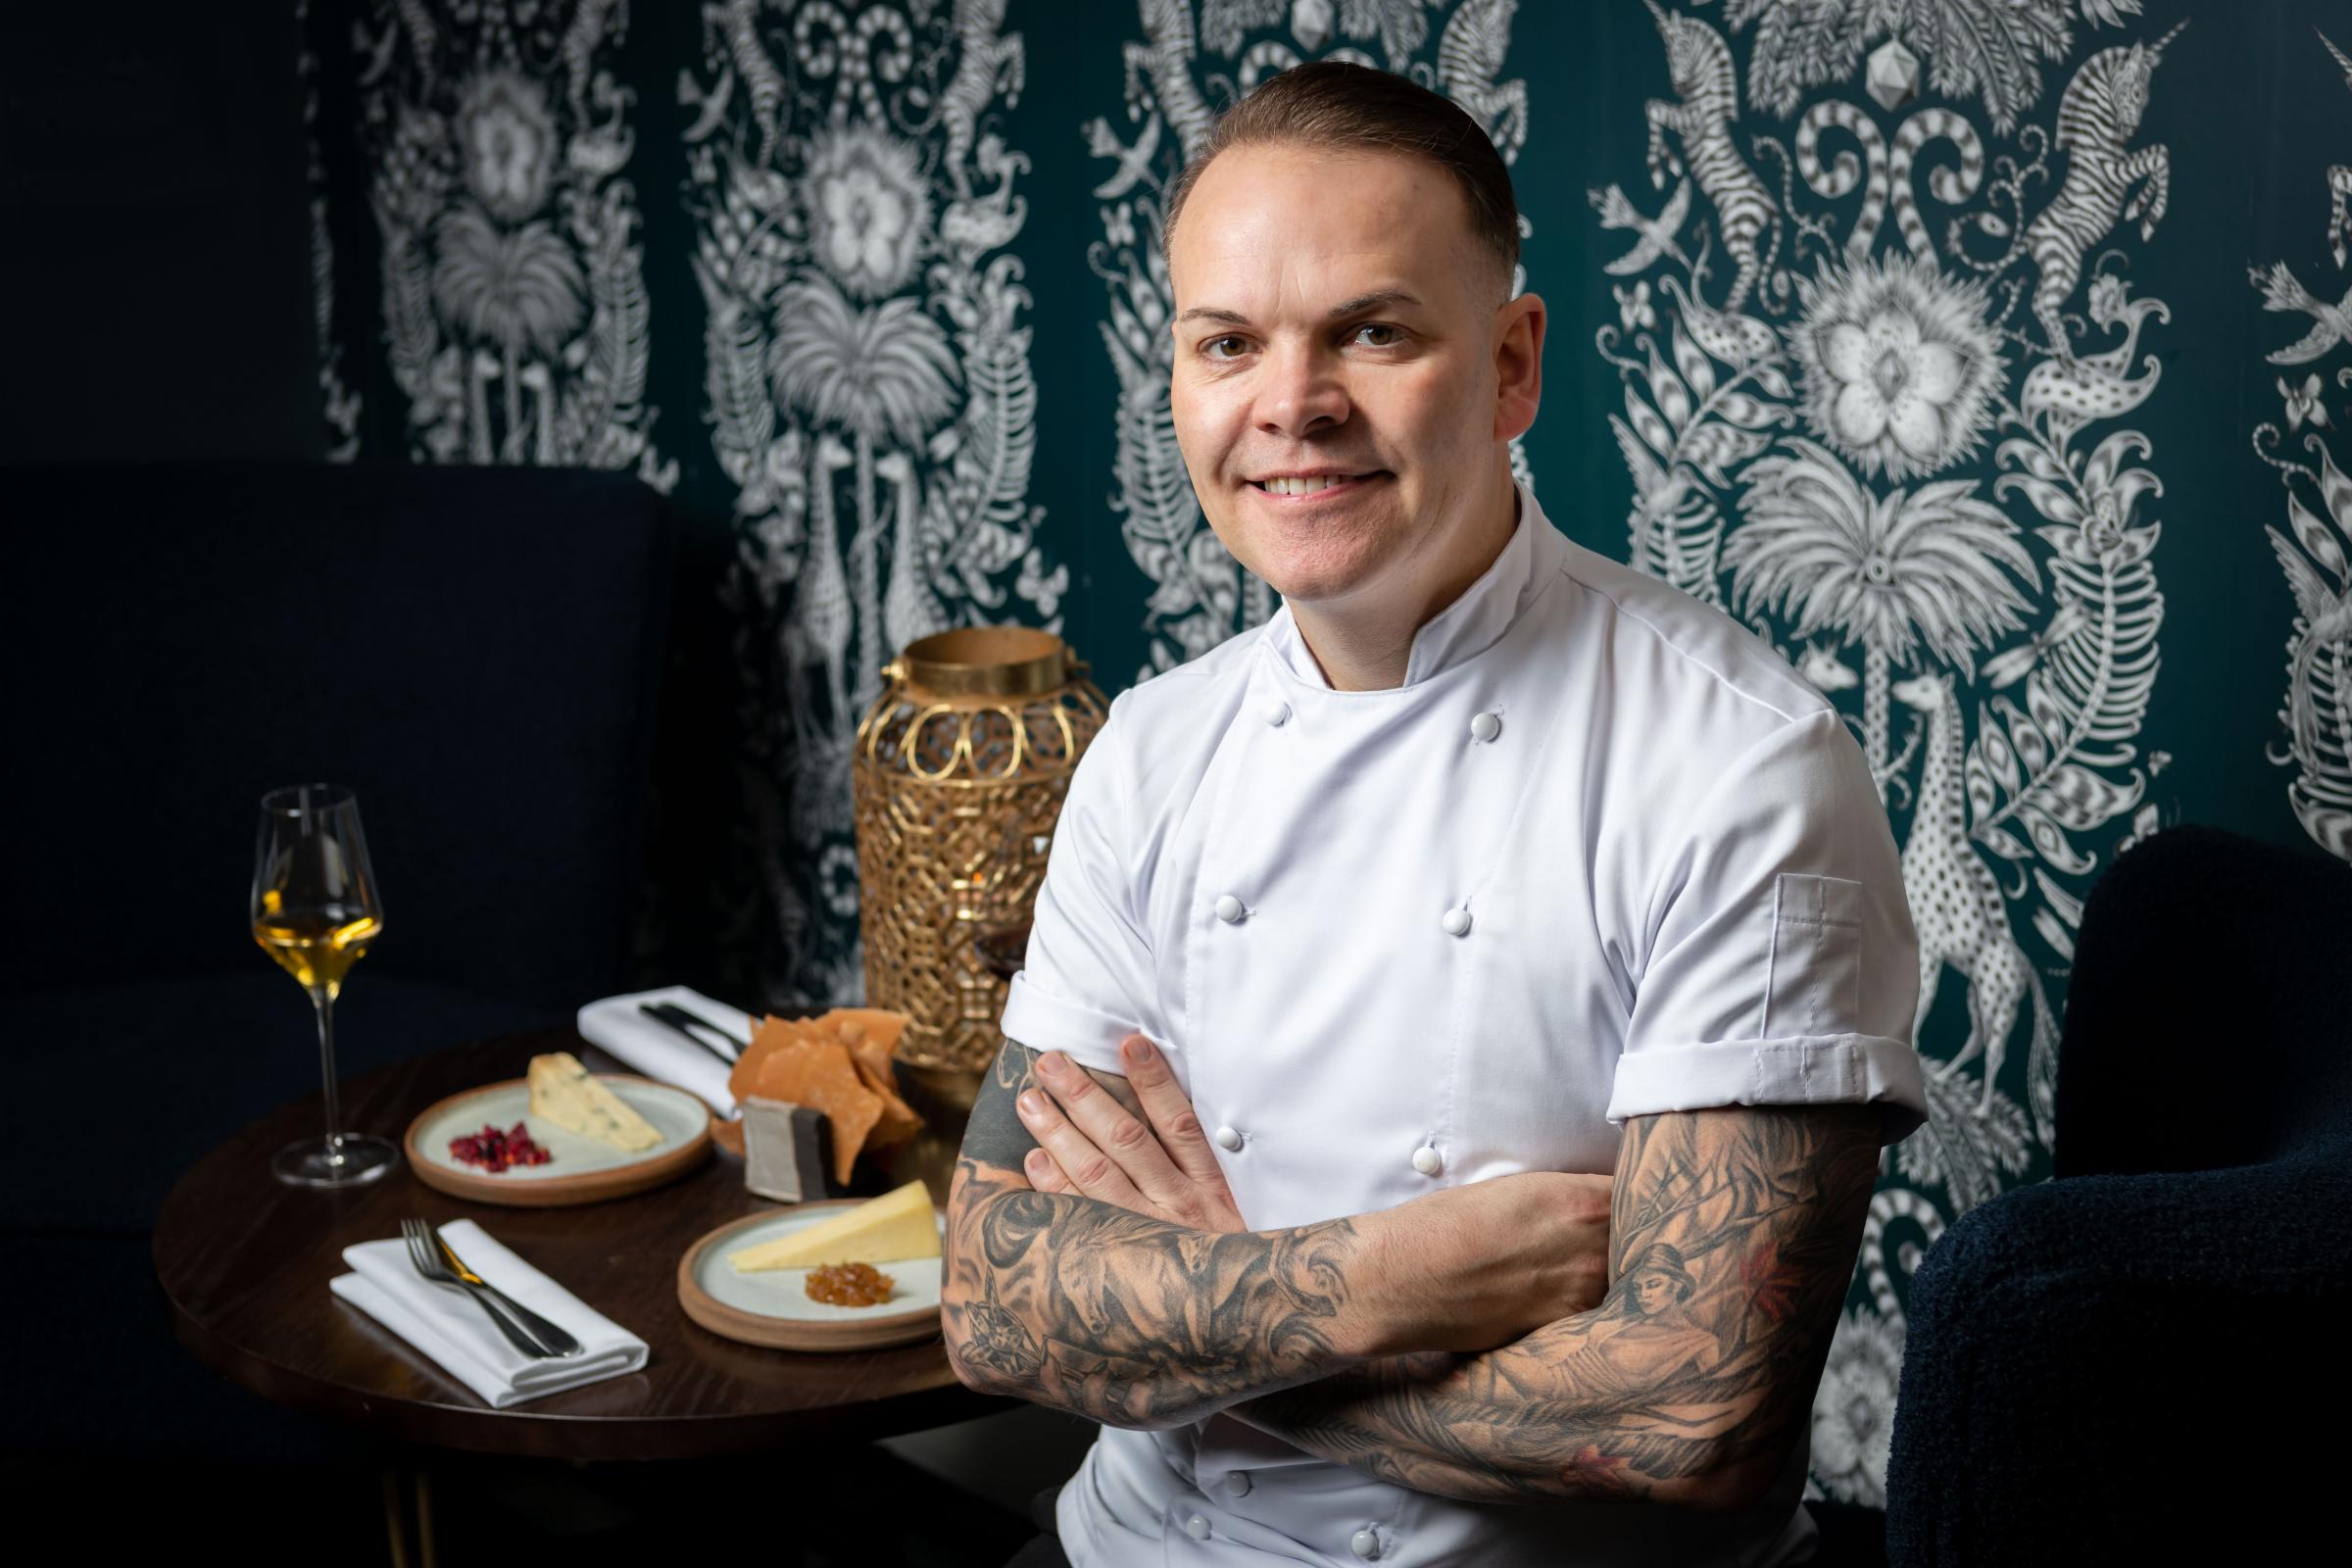 The 2015 Masterchef winner is chasing a Michelin star (Image: Simon Wood).